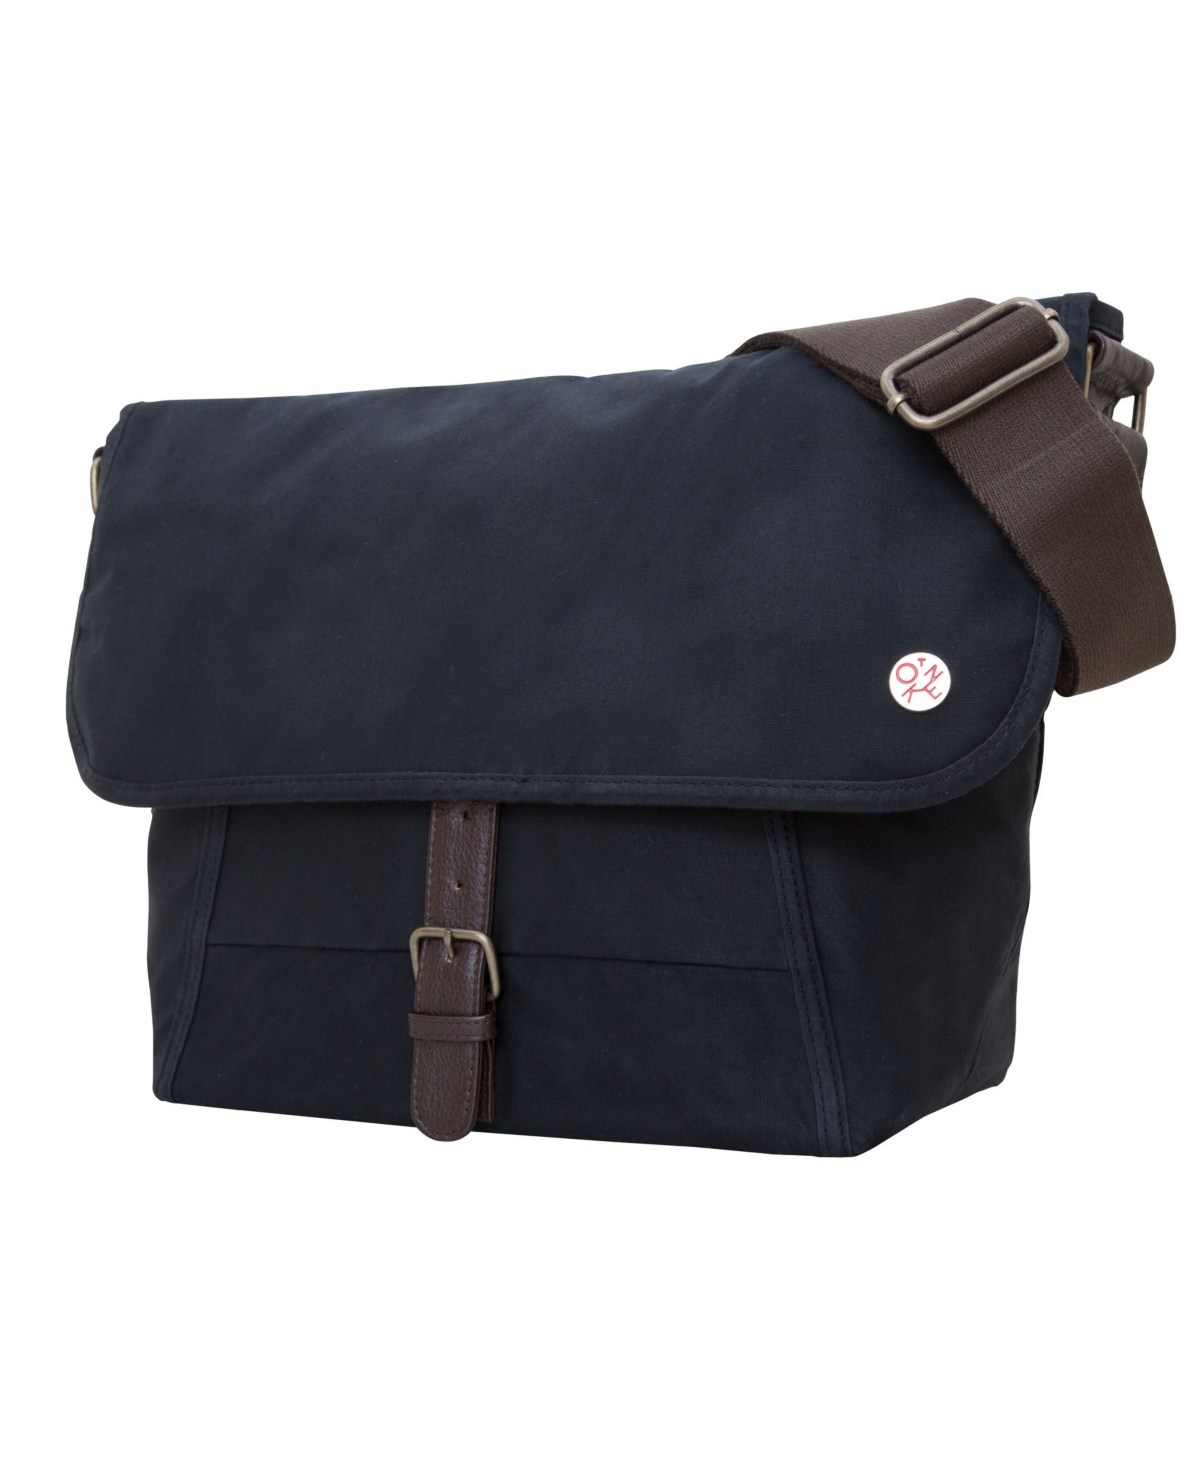 Waxed Lincoln Small Messenger - Dark Brown